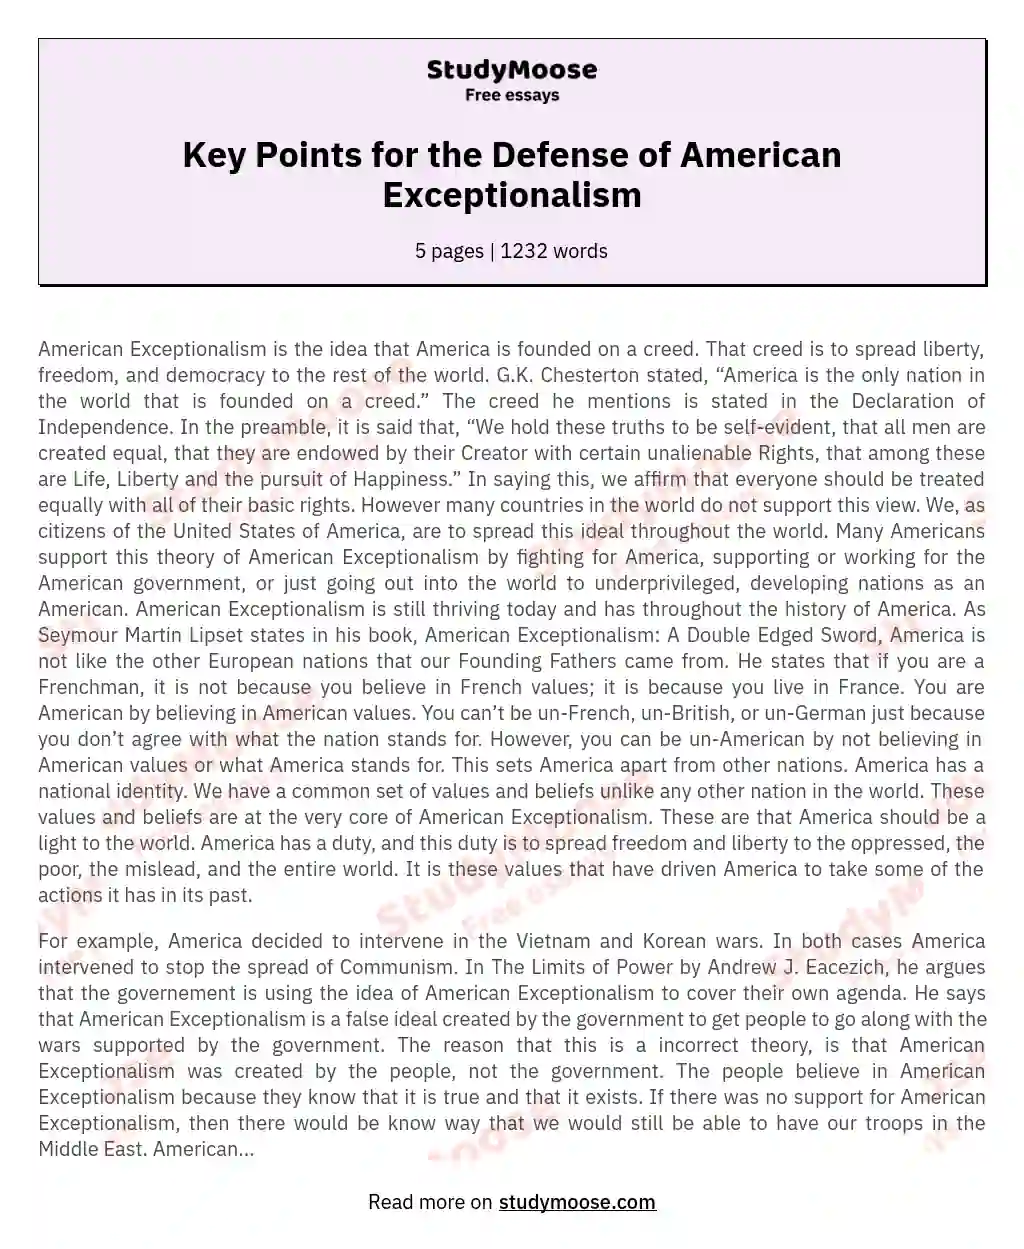 Key Points for the Defense of American Exceptionalism essay